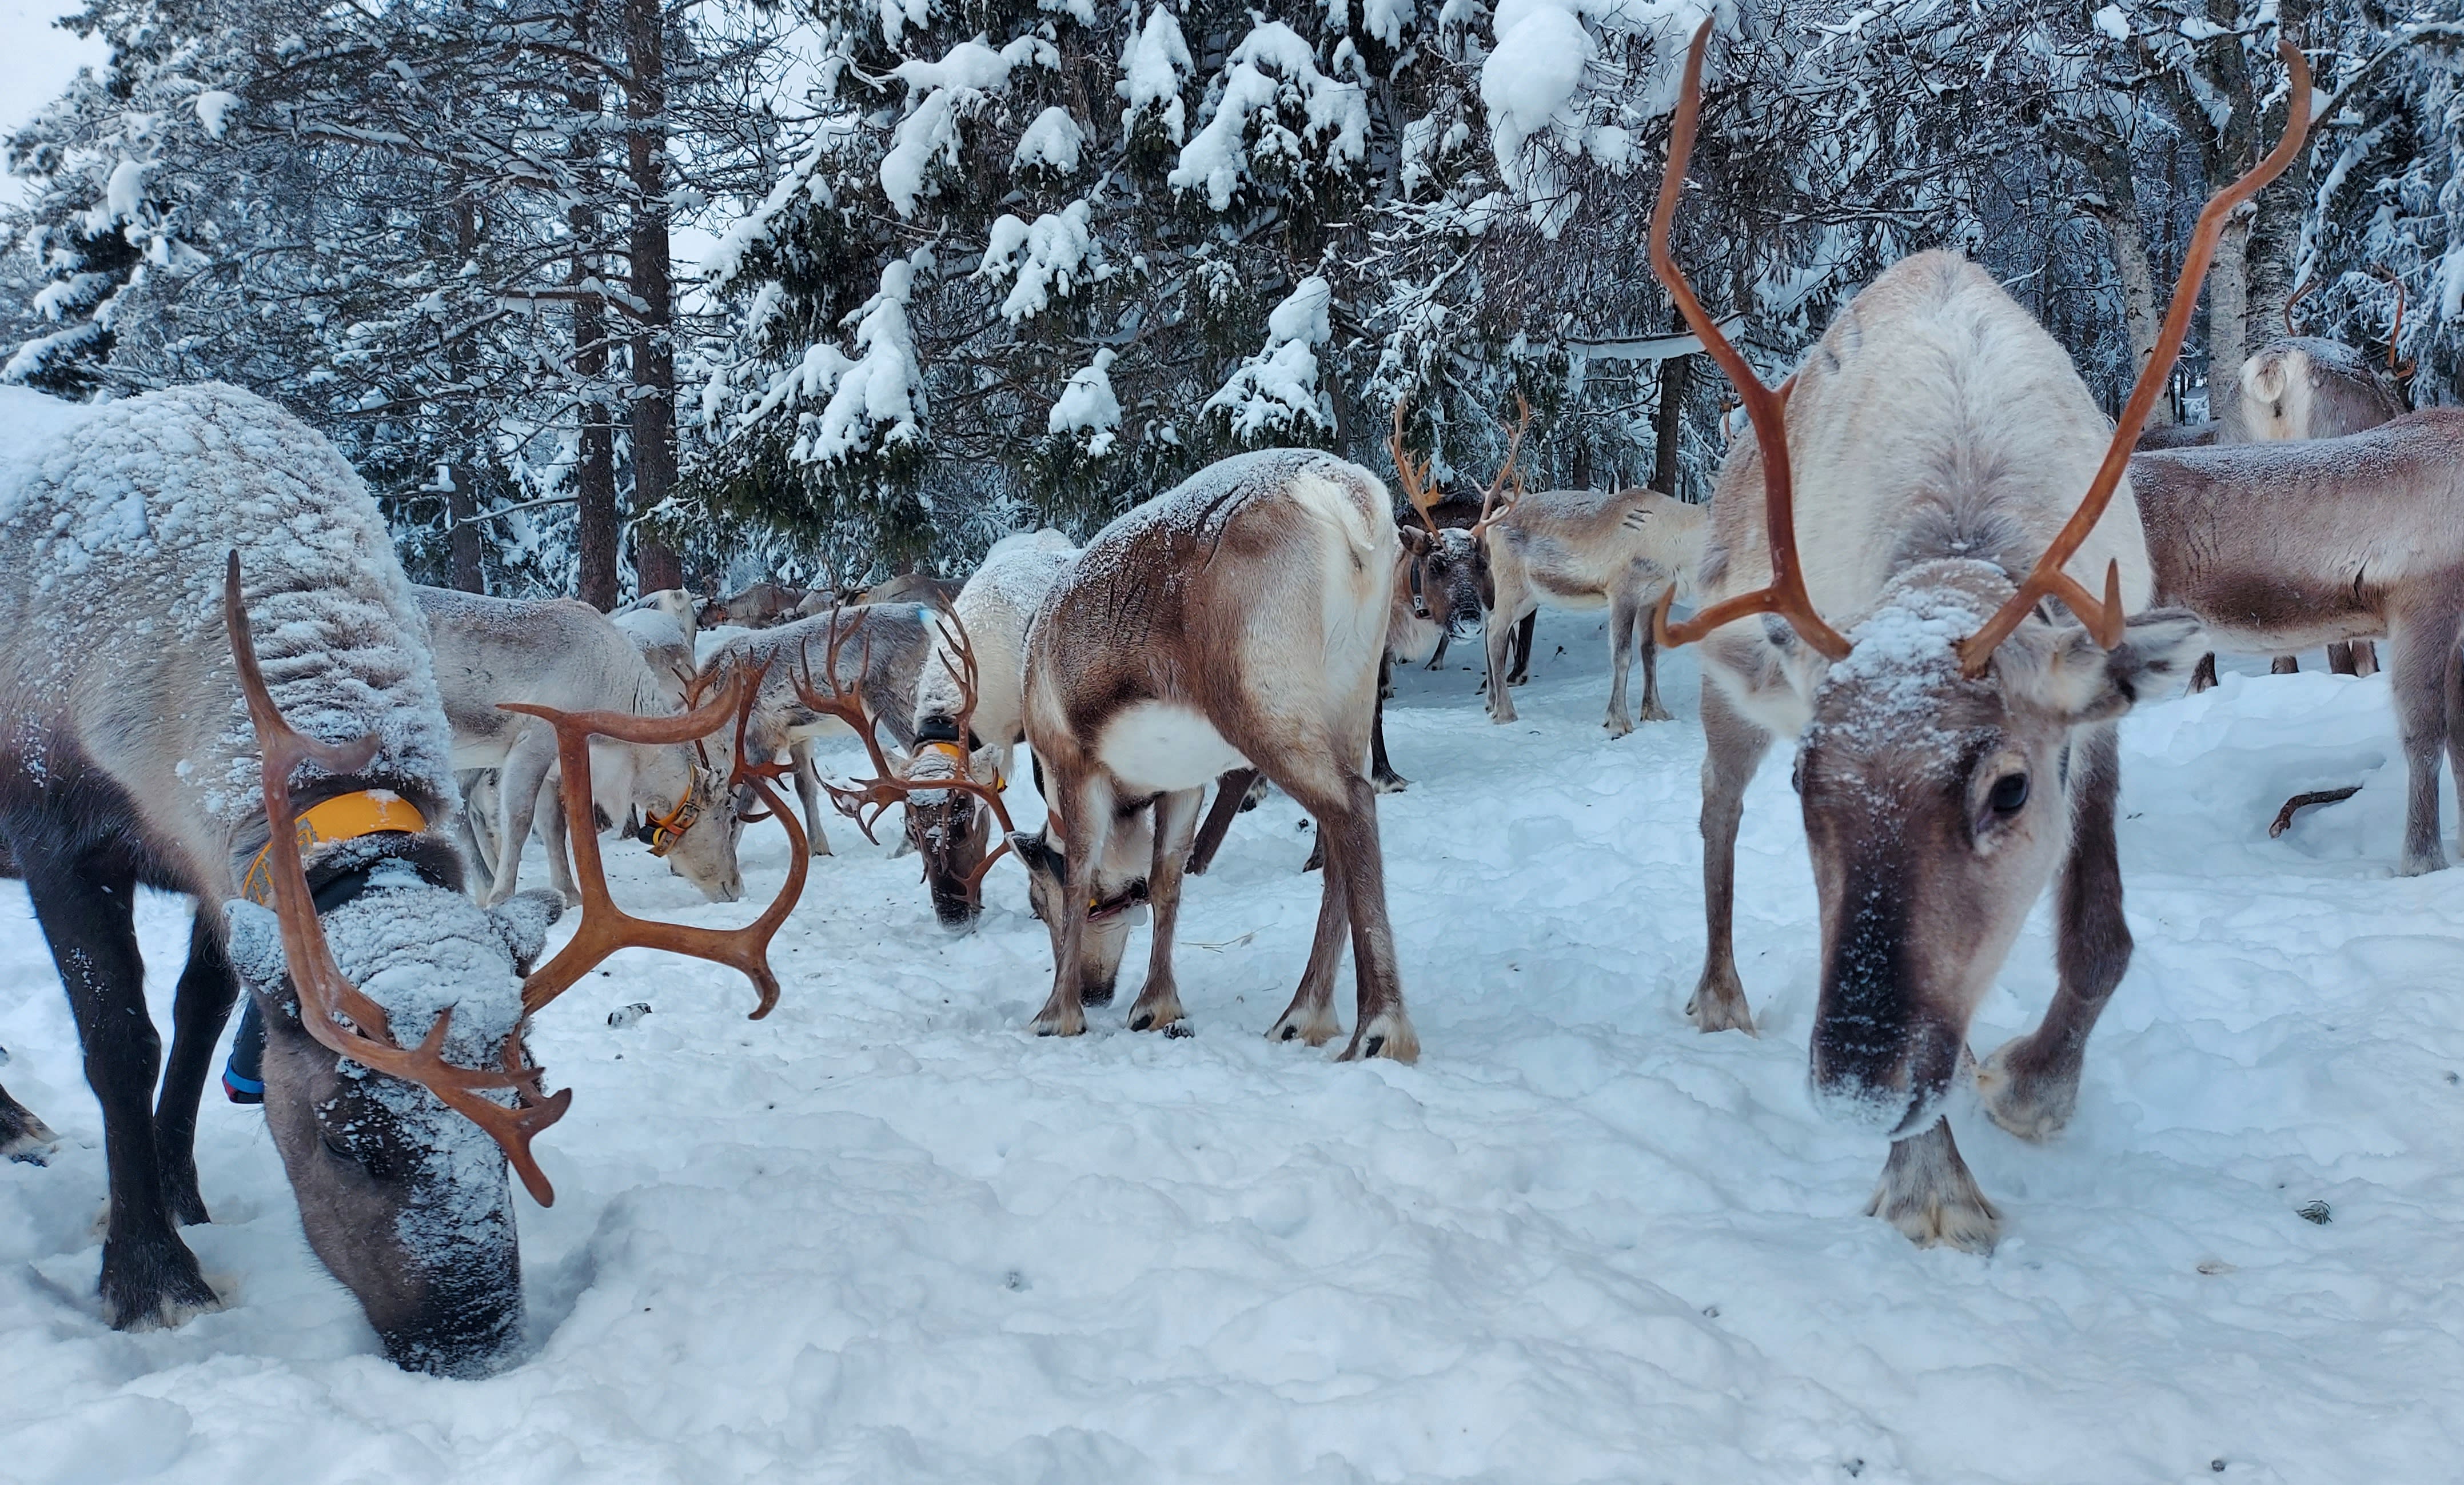 BBC: Thousands of reindeer lost in Lapland